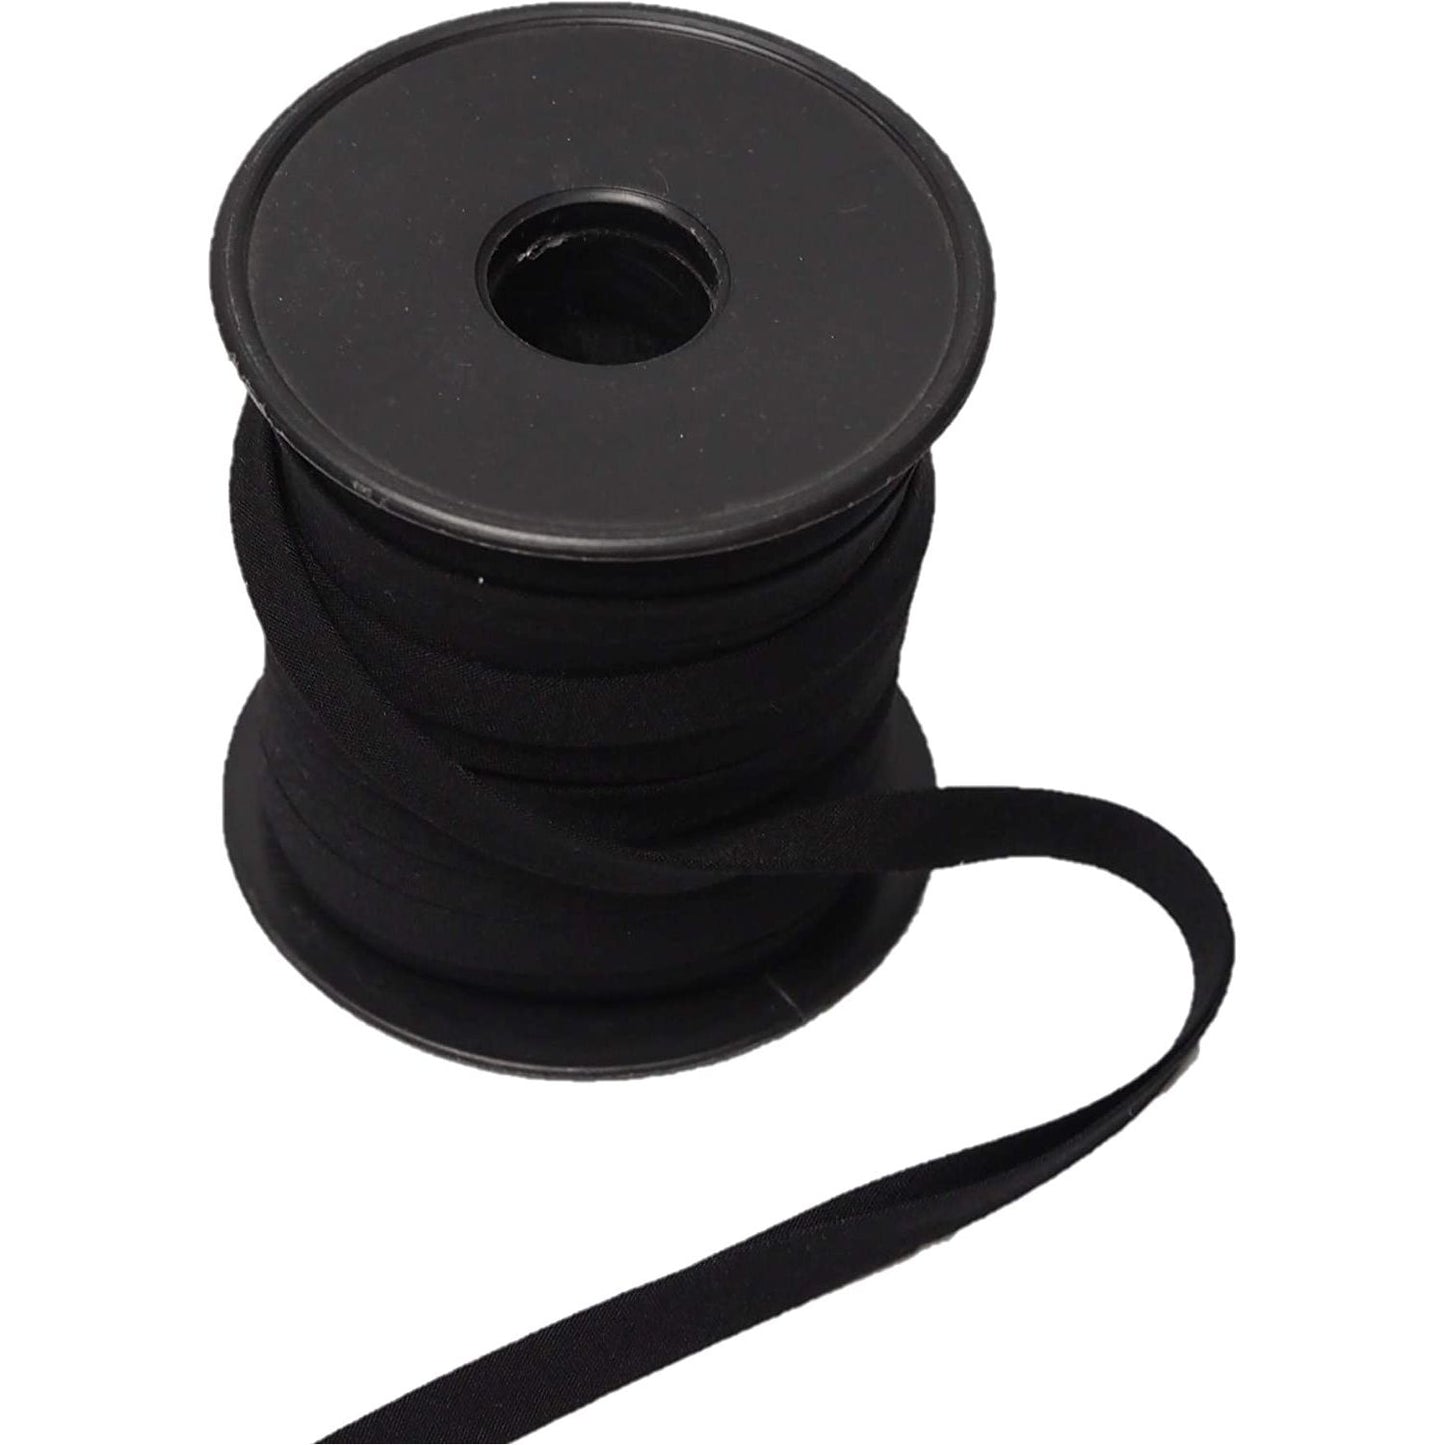 hobby trendy double fold cotton bias binding tape, for sewing, seaming, hemming, piping, quilting, 10mm- 3/8inch. continuous bulk spool of 27.30 yards - 25 meters black